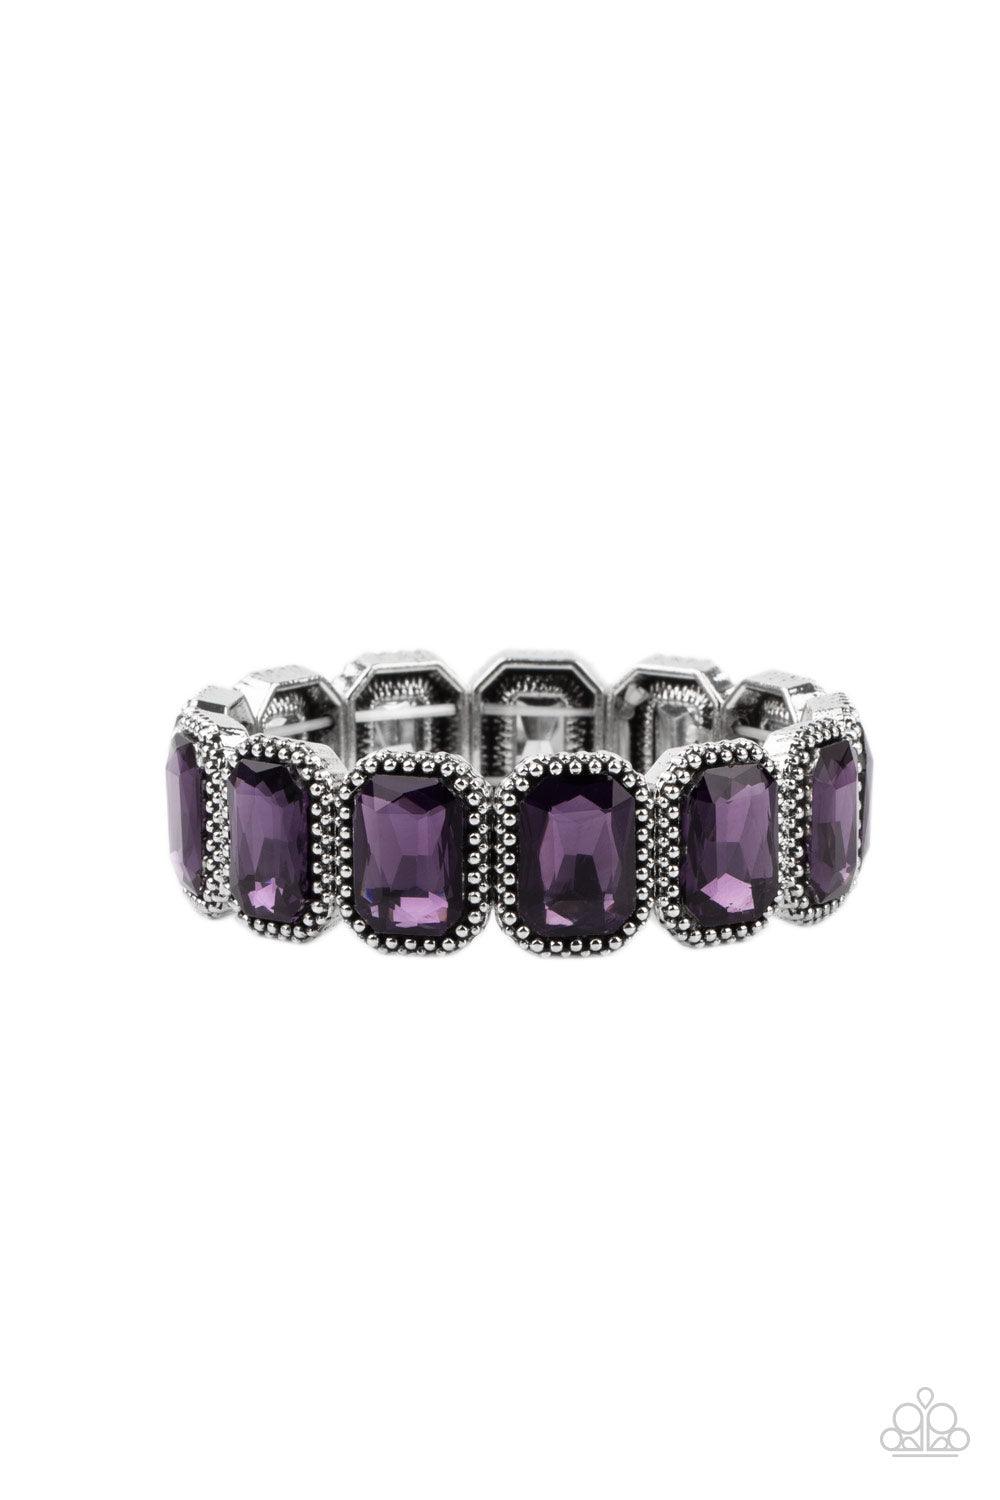 Paparazzi Accessories Studded Smolder - Purple Oversized emerald style purple gems are encased in antiqued studded frames that are threaded along stretchy bands around the wrist, creating a smoldering centerpiece. Sold as one individual bracelet. Jewelry